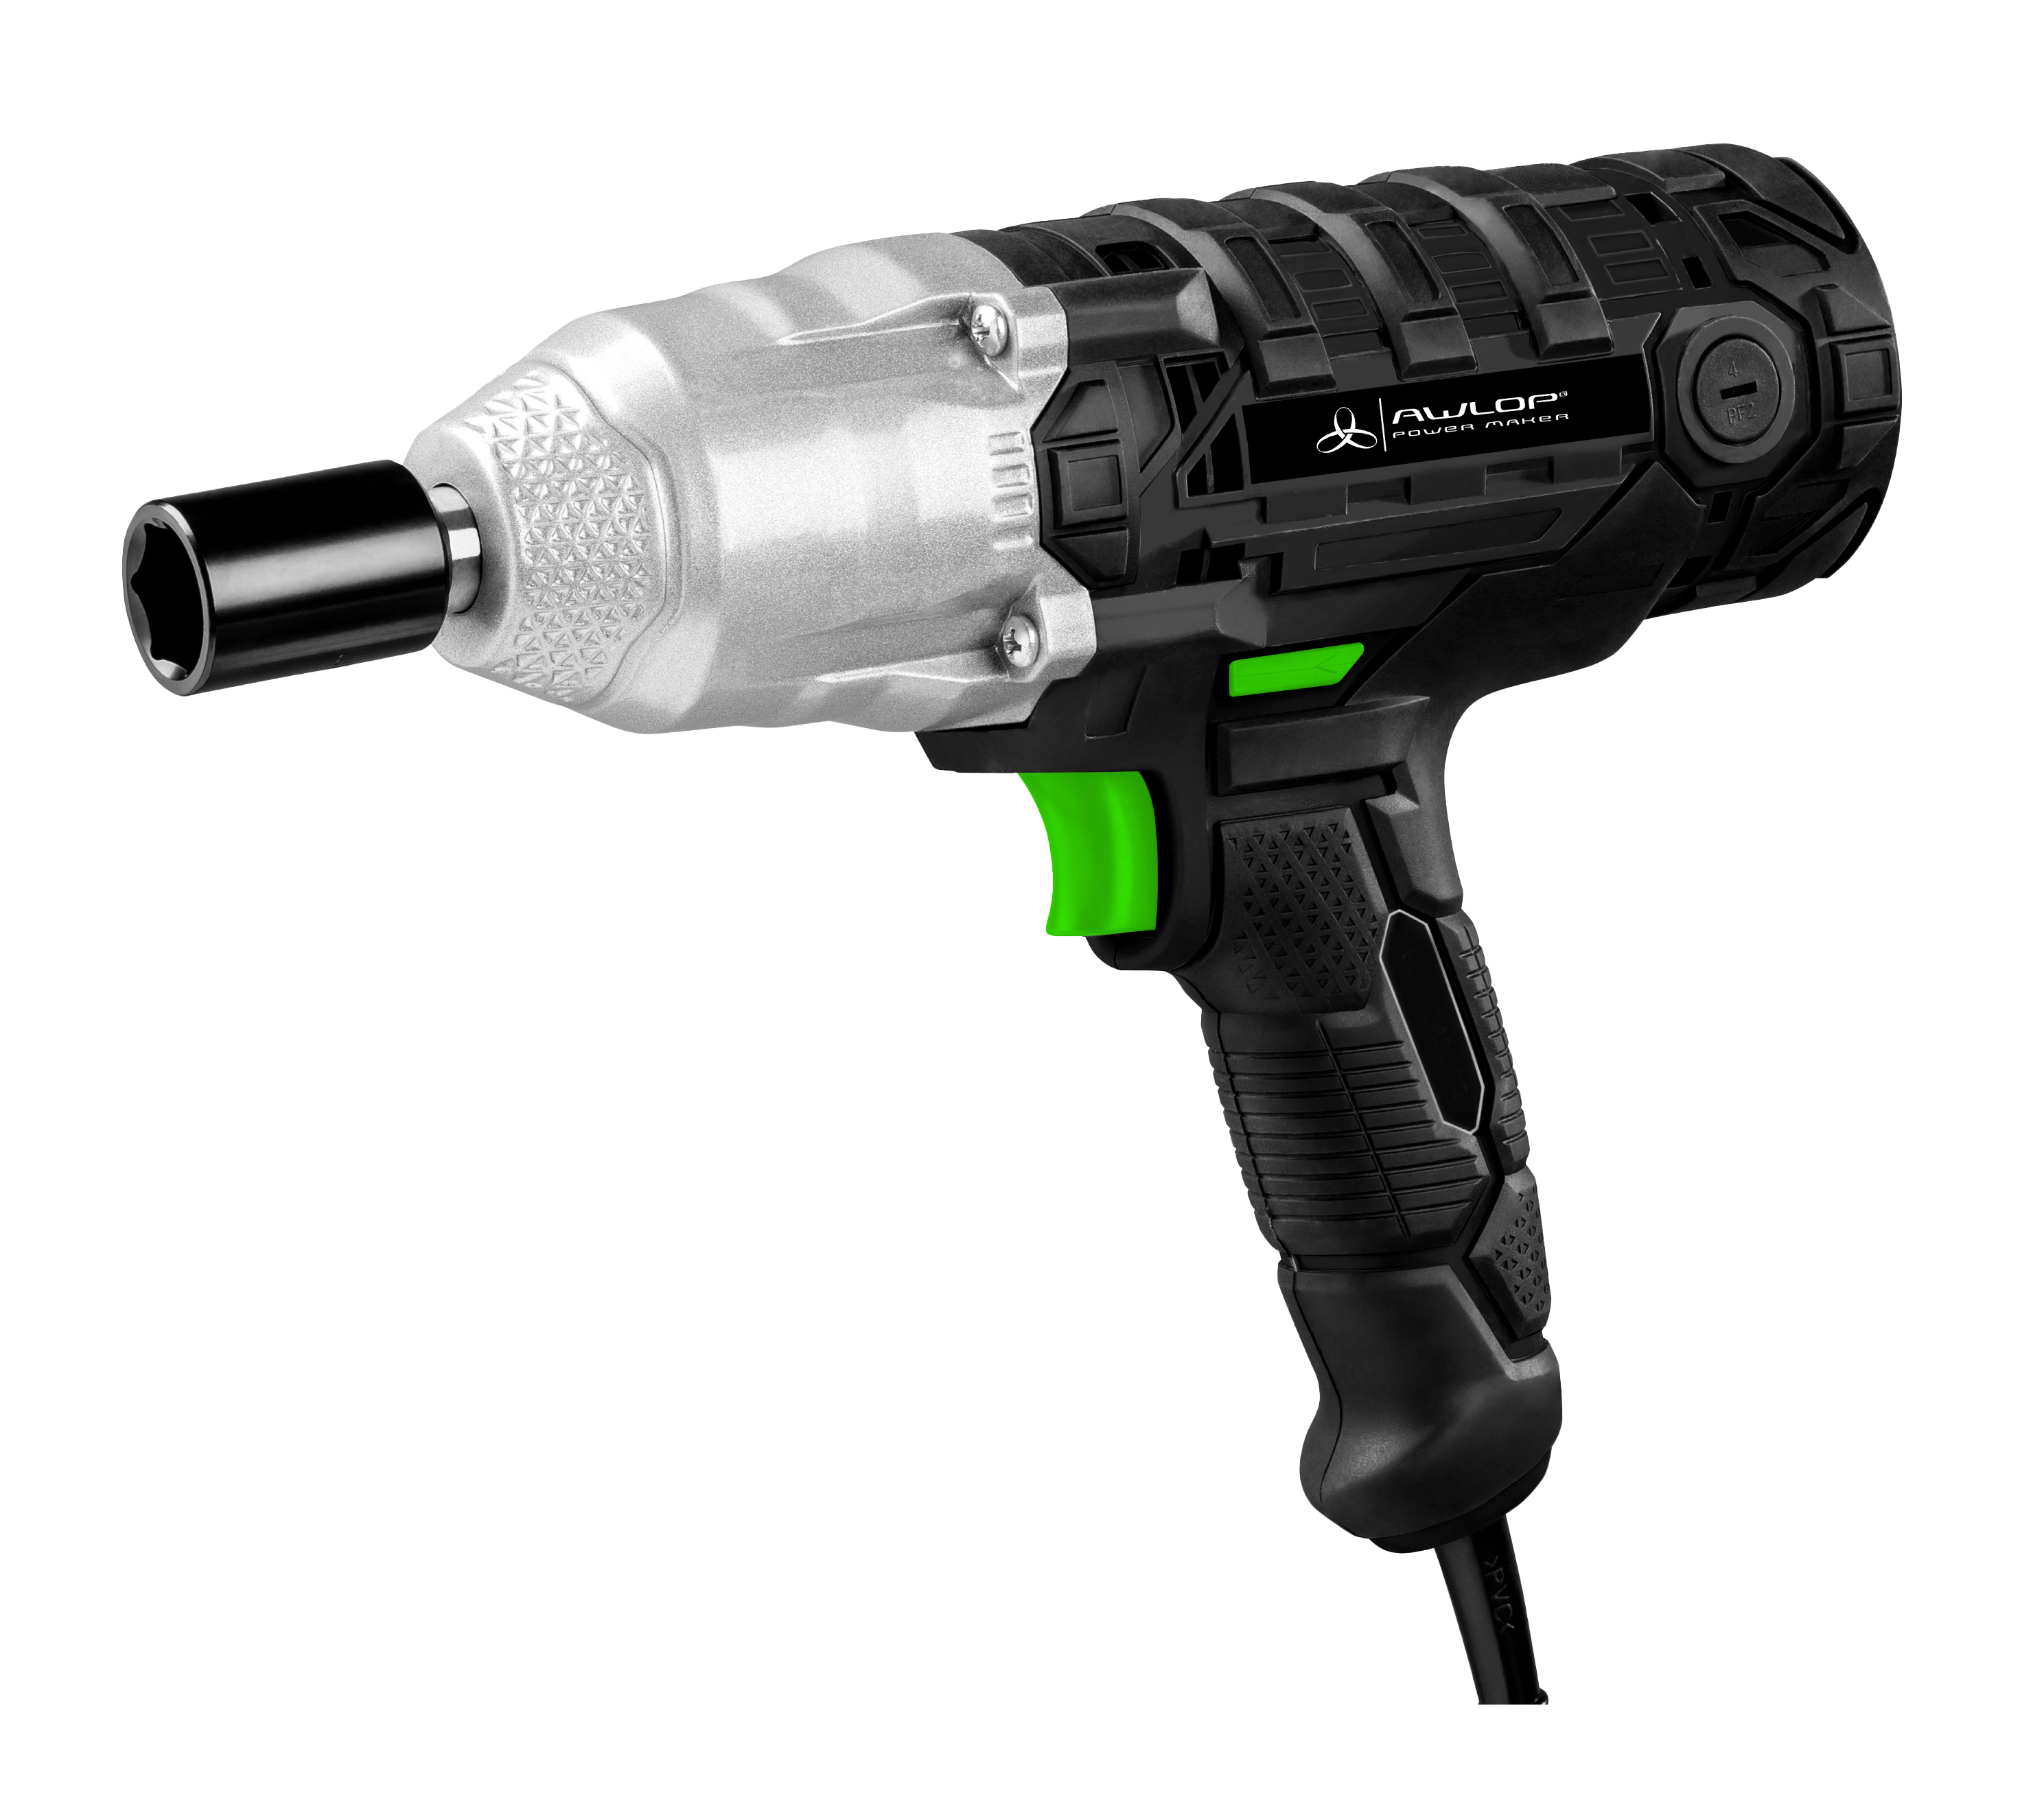 AWLOP IW450 Electric Corded Impact Wrench 450W